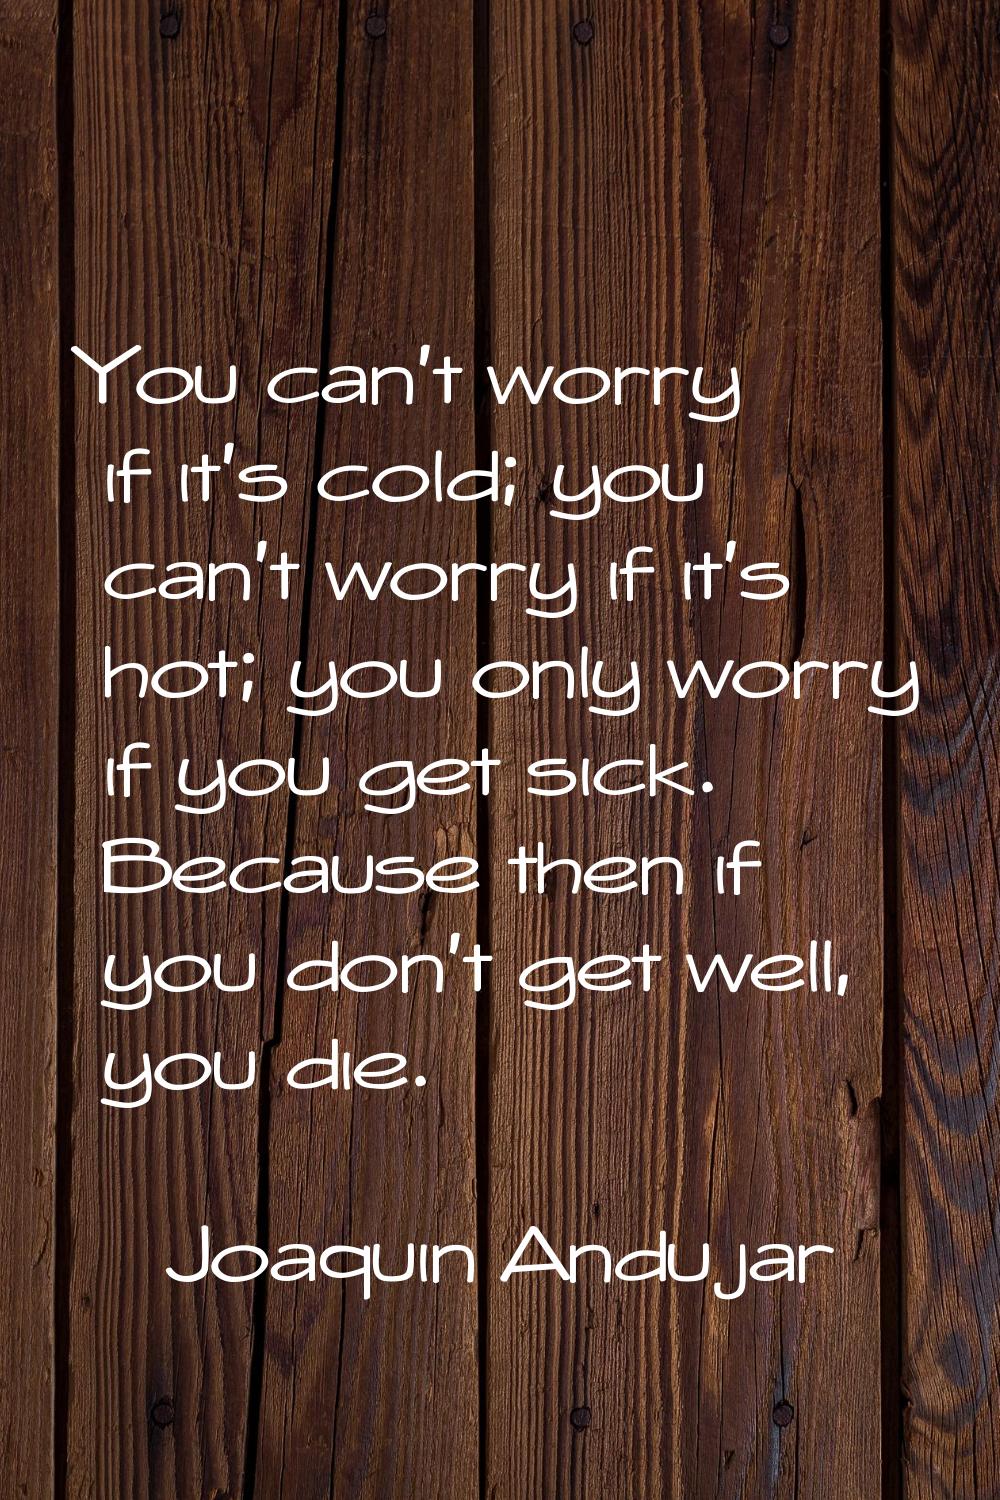 You can't worry if it's cold; you can't worry if it's hot; you only worry if you get sick. Because 